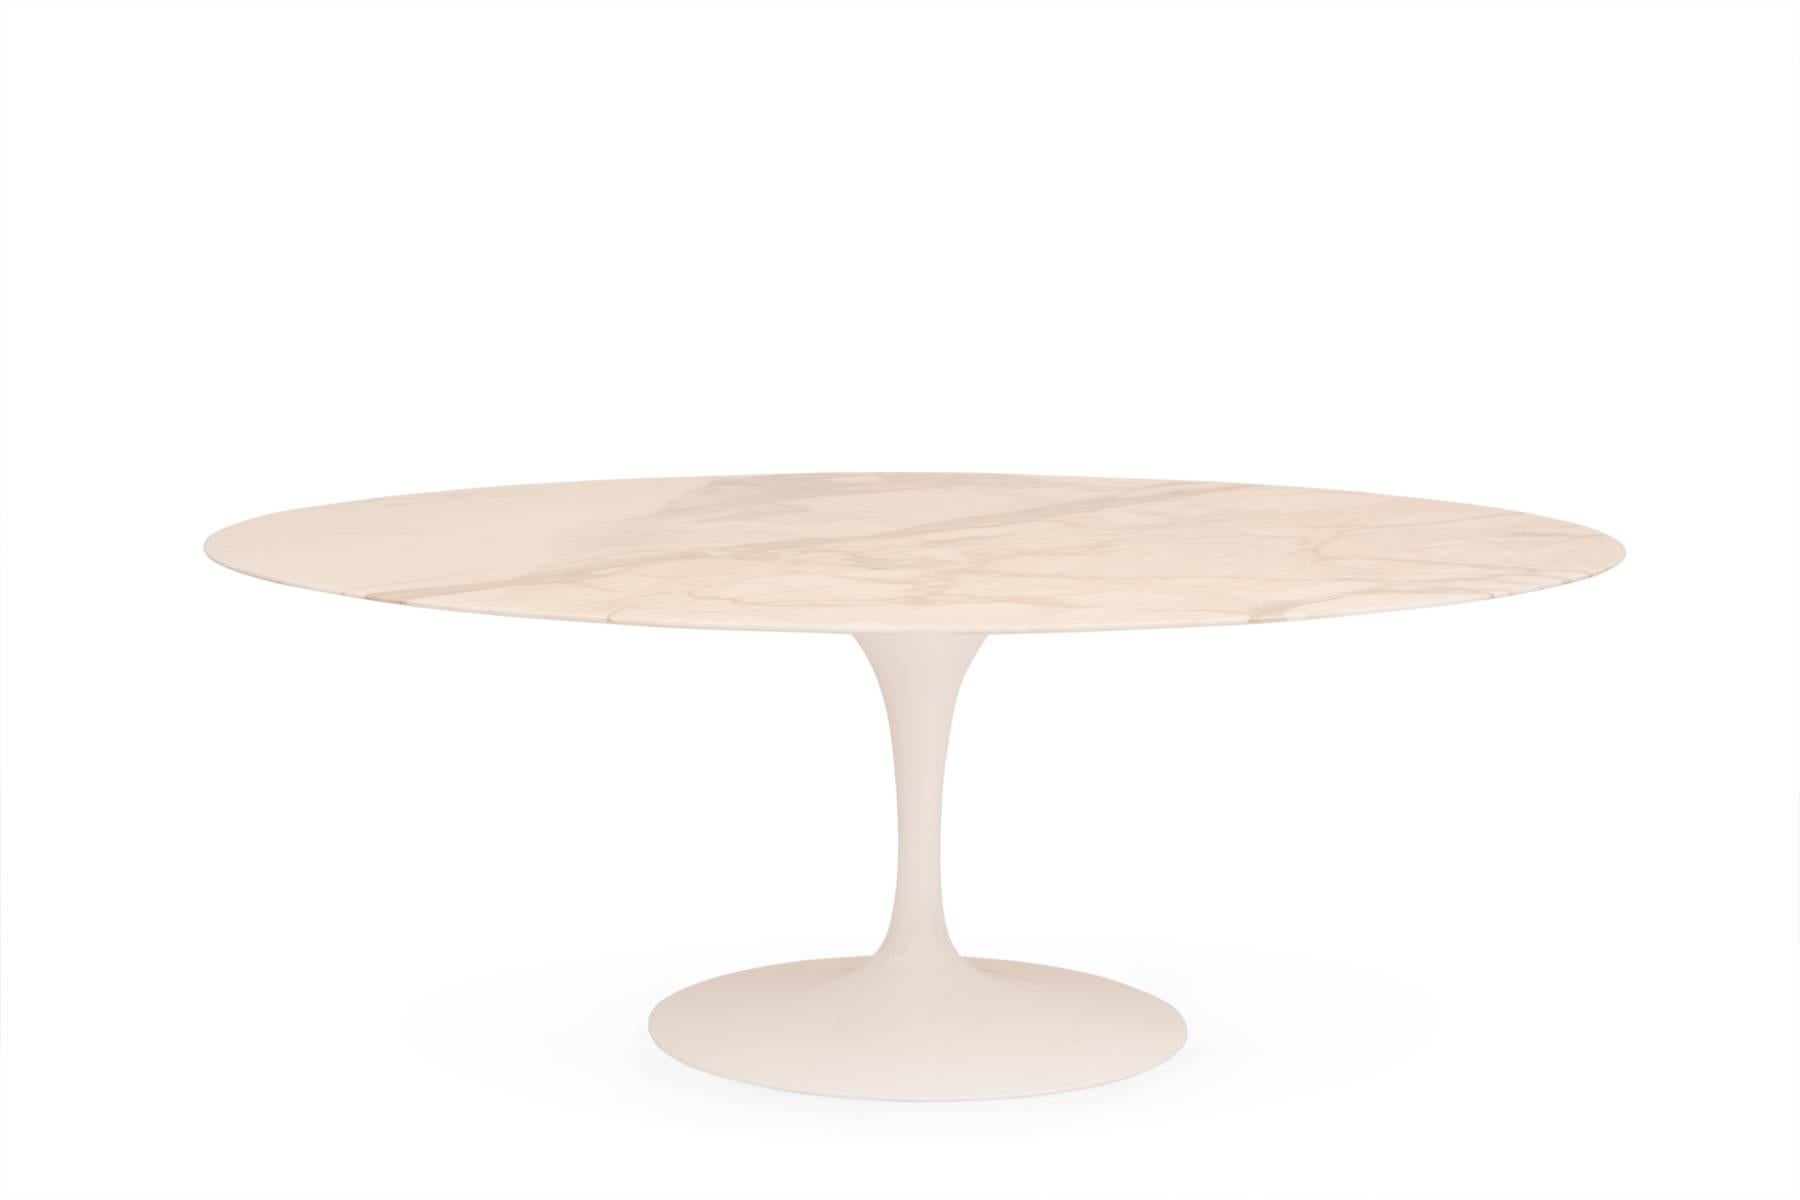 Eero Saarinen for Knoll Calacatta marble oval dining table, circa mid-1970s. This all original example has an incredibly grained knife edge marble top with the earlier iron base. Labeled and in excellent original condition.